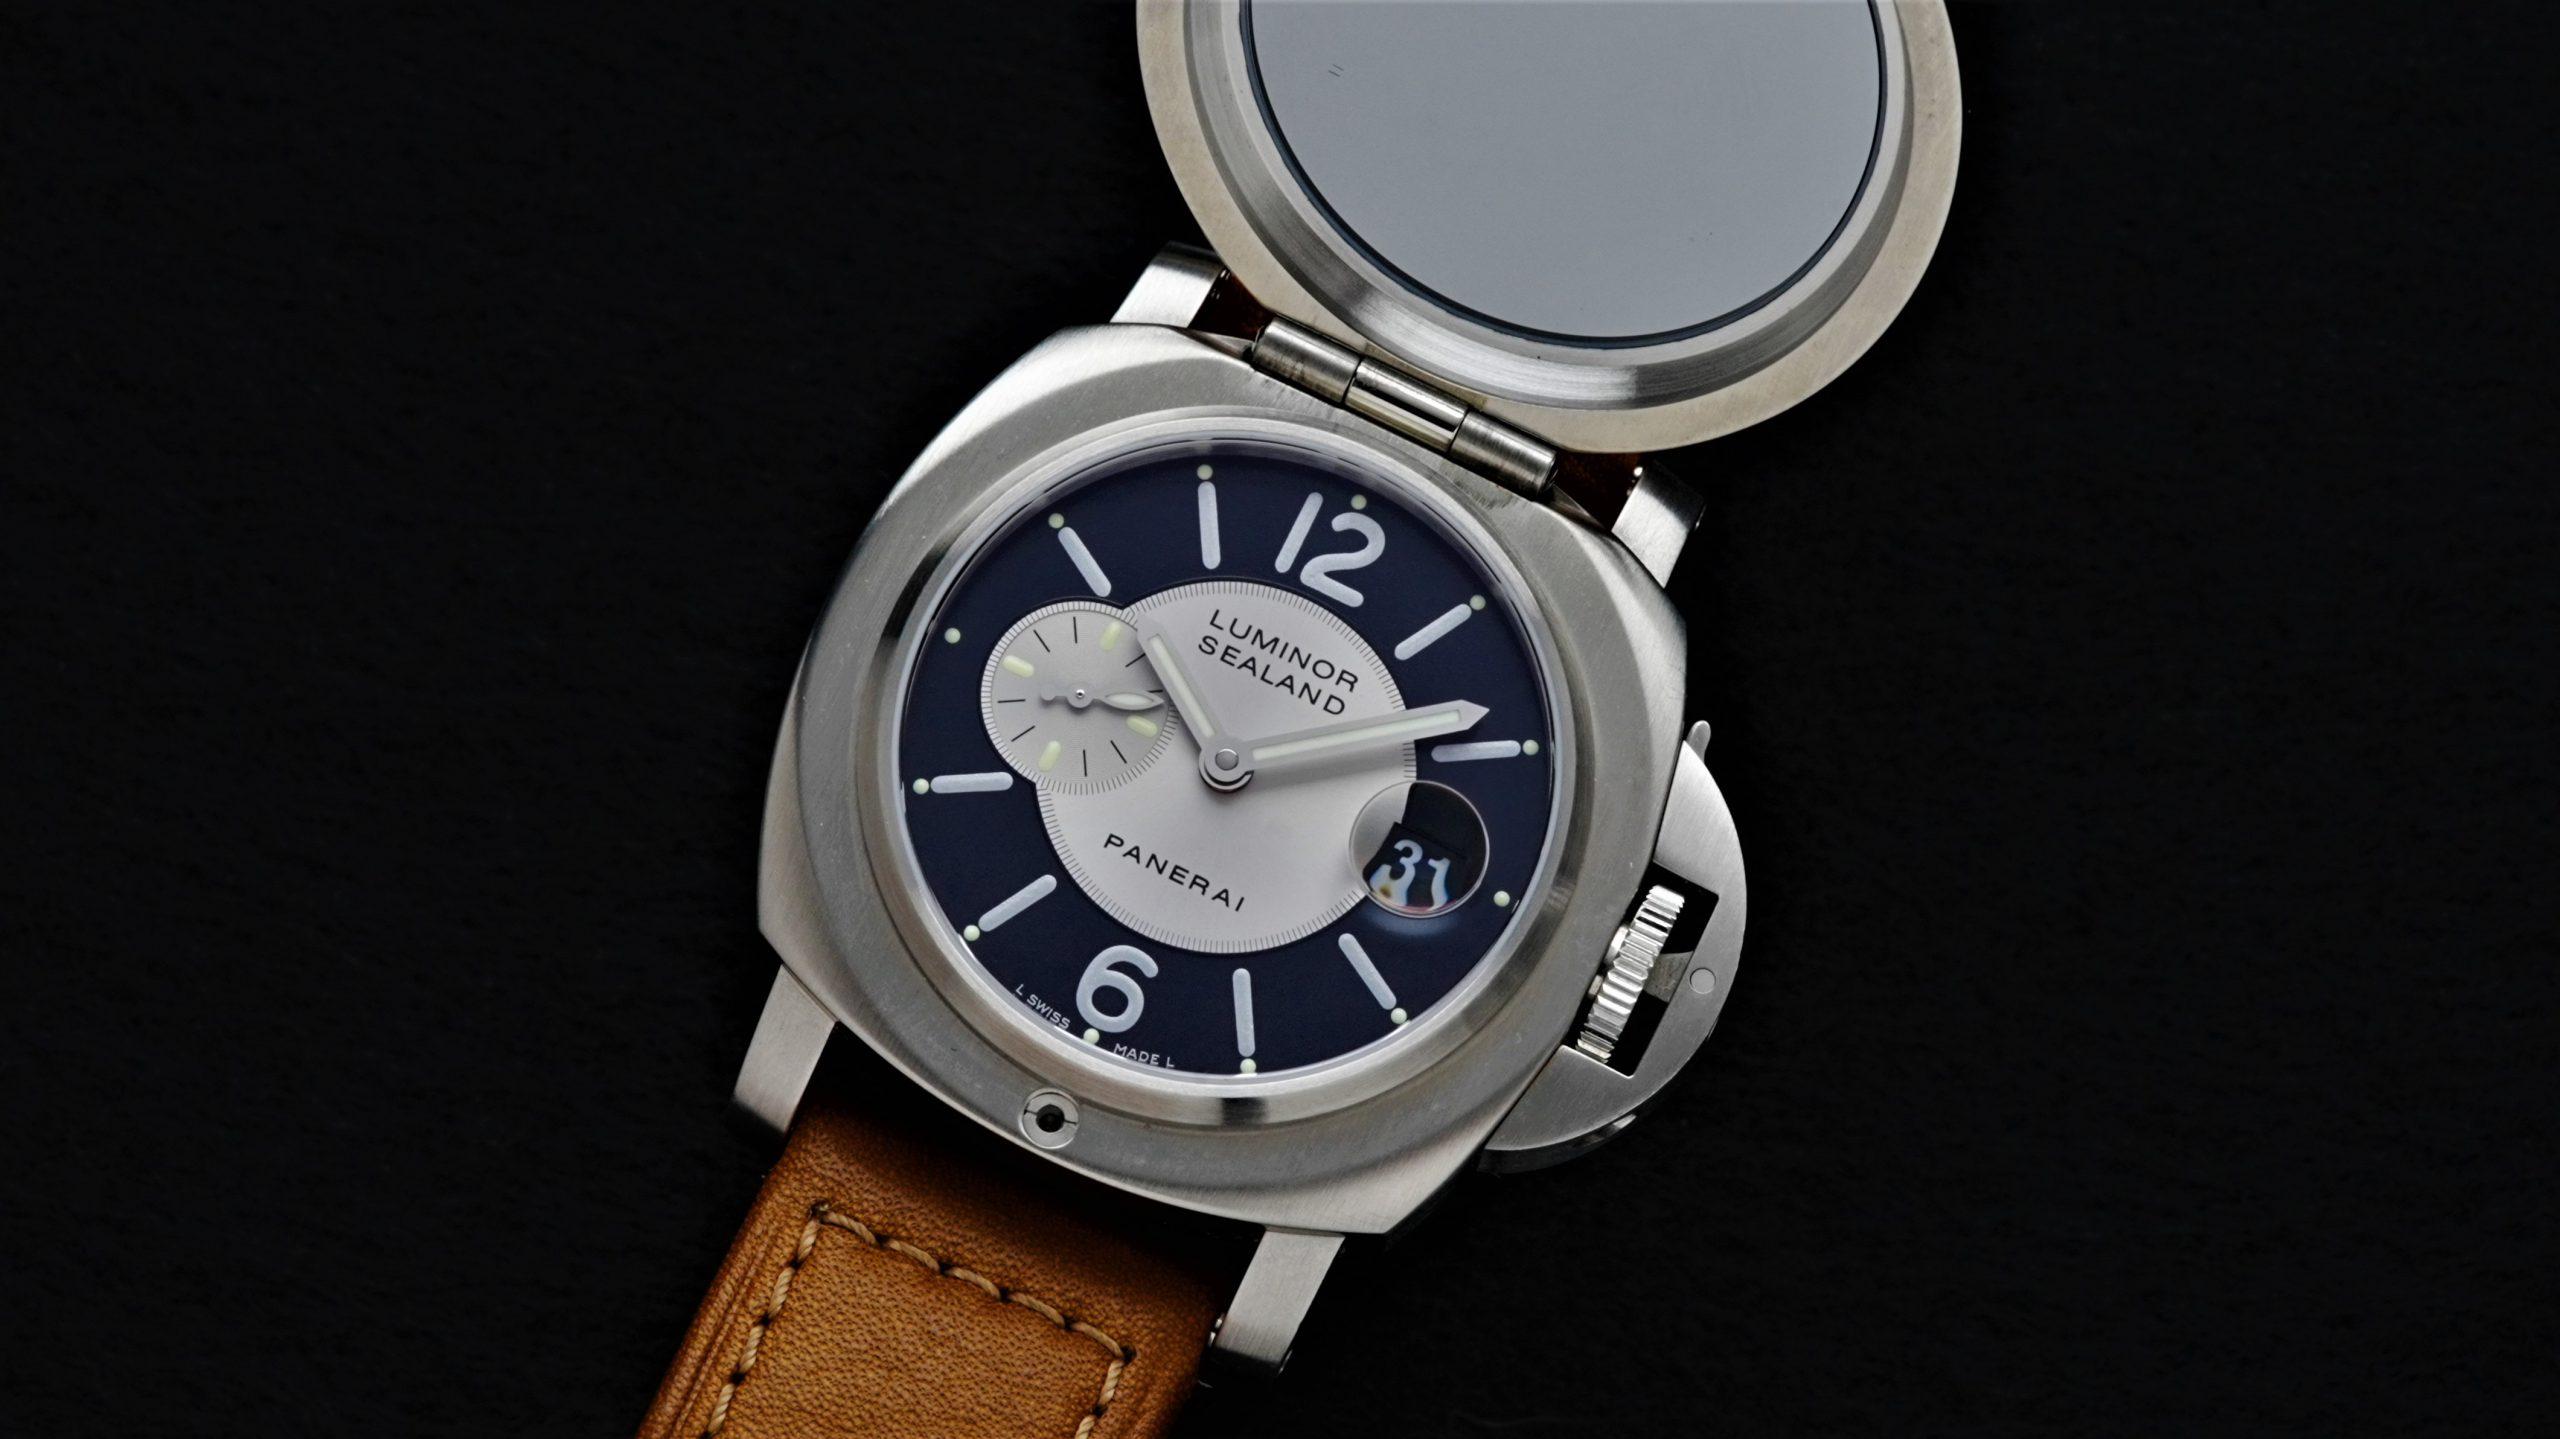 Panerai Luminor For Purdey Limired Edition watch opened.